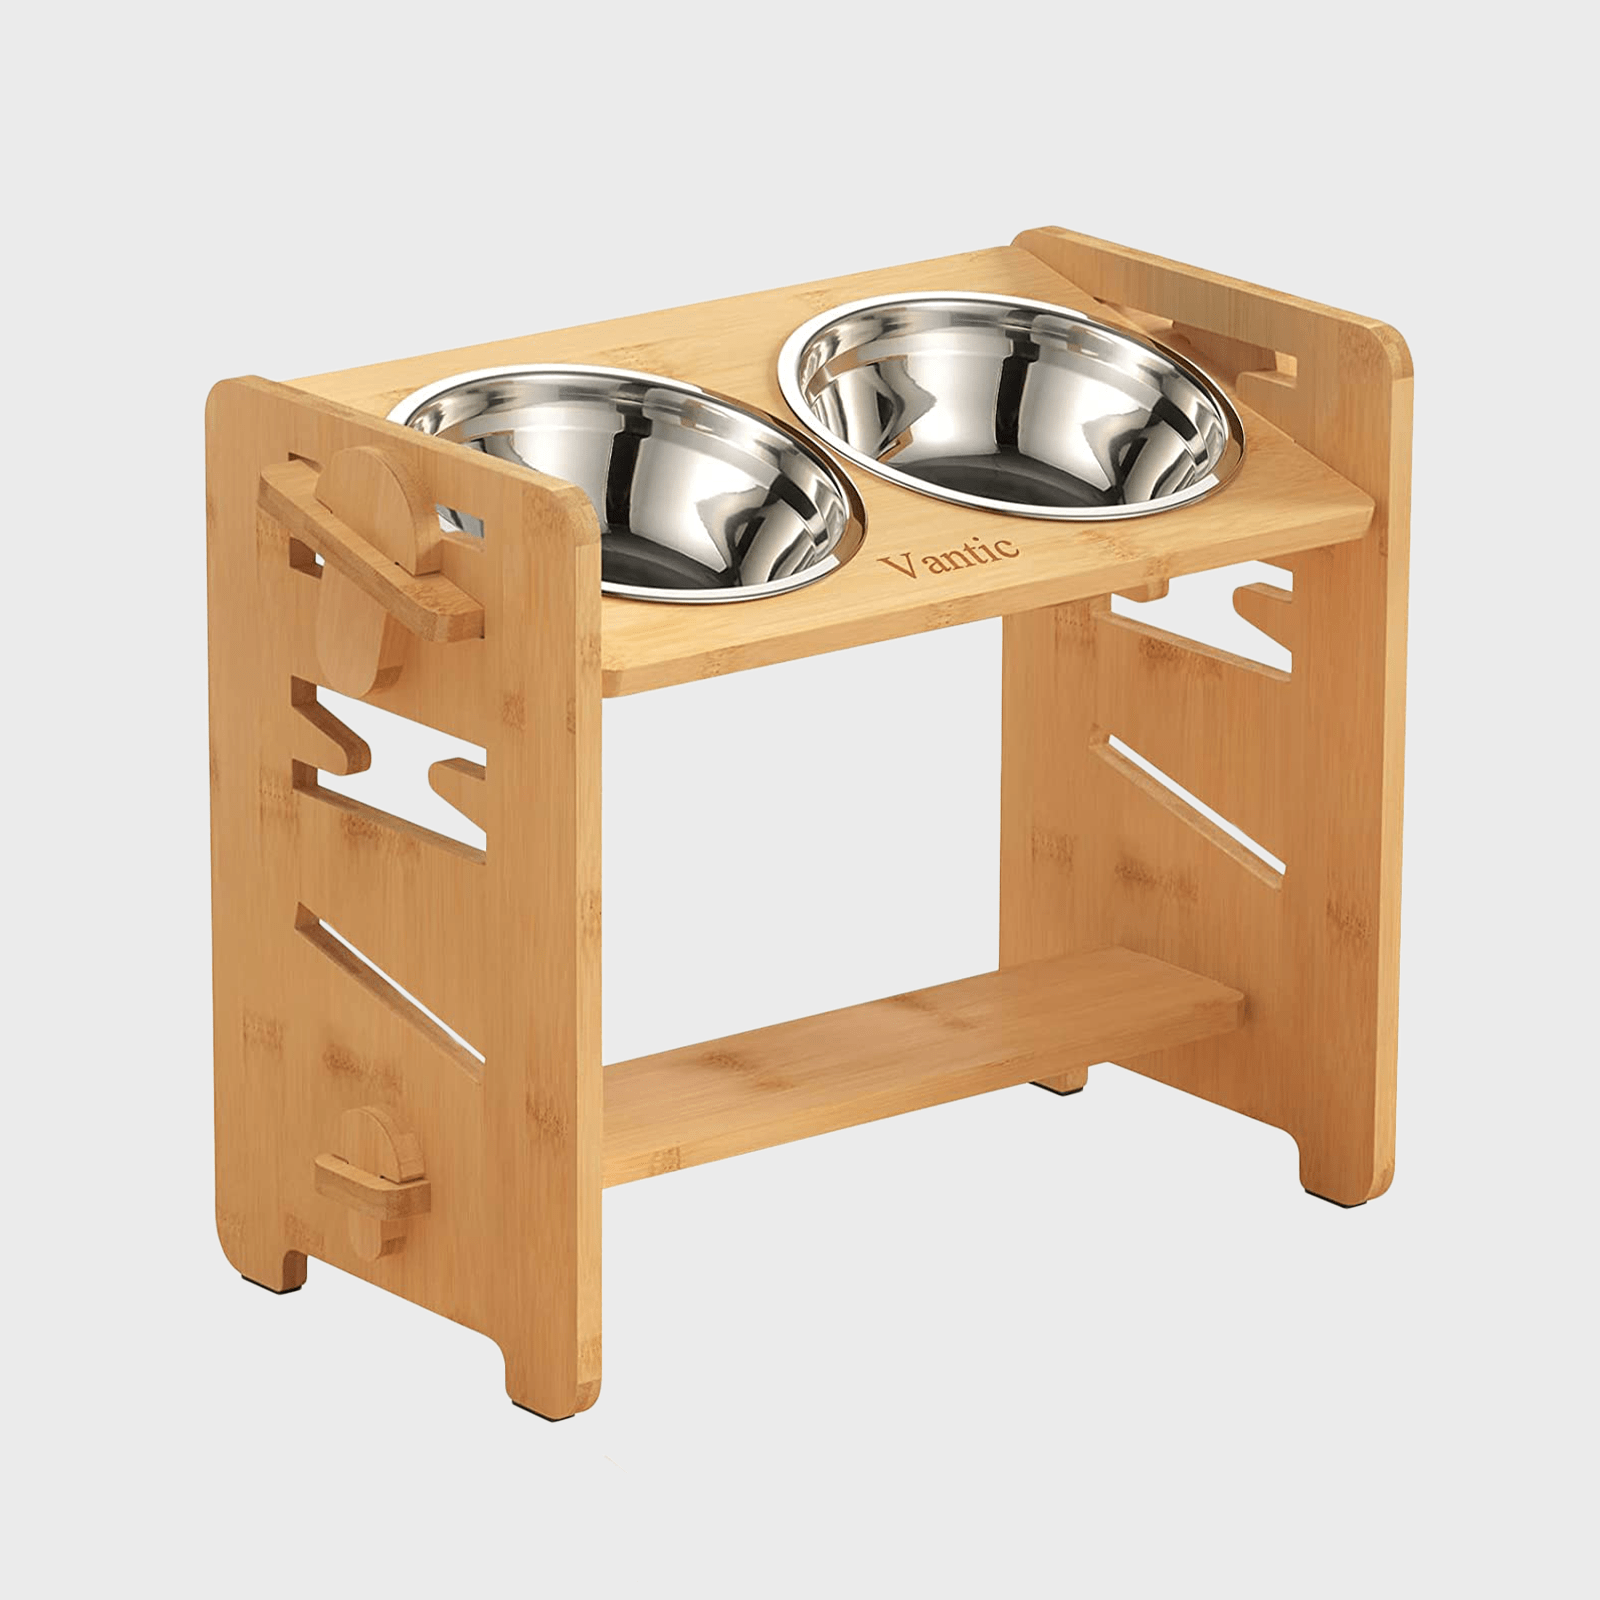 Lifted Dog Bowl Stand, Raised Dog Bowl Holder, Adjustable Dog Bowl Stand  with 5 Different Height Levels, Wooden Dog Bowl Stand with Non-Slip pad for